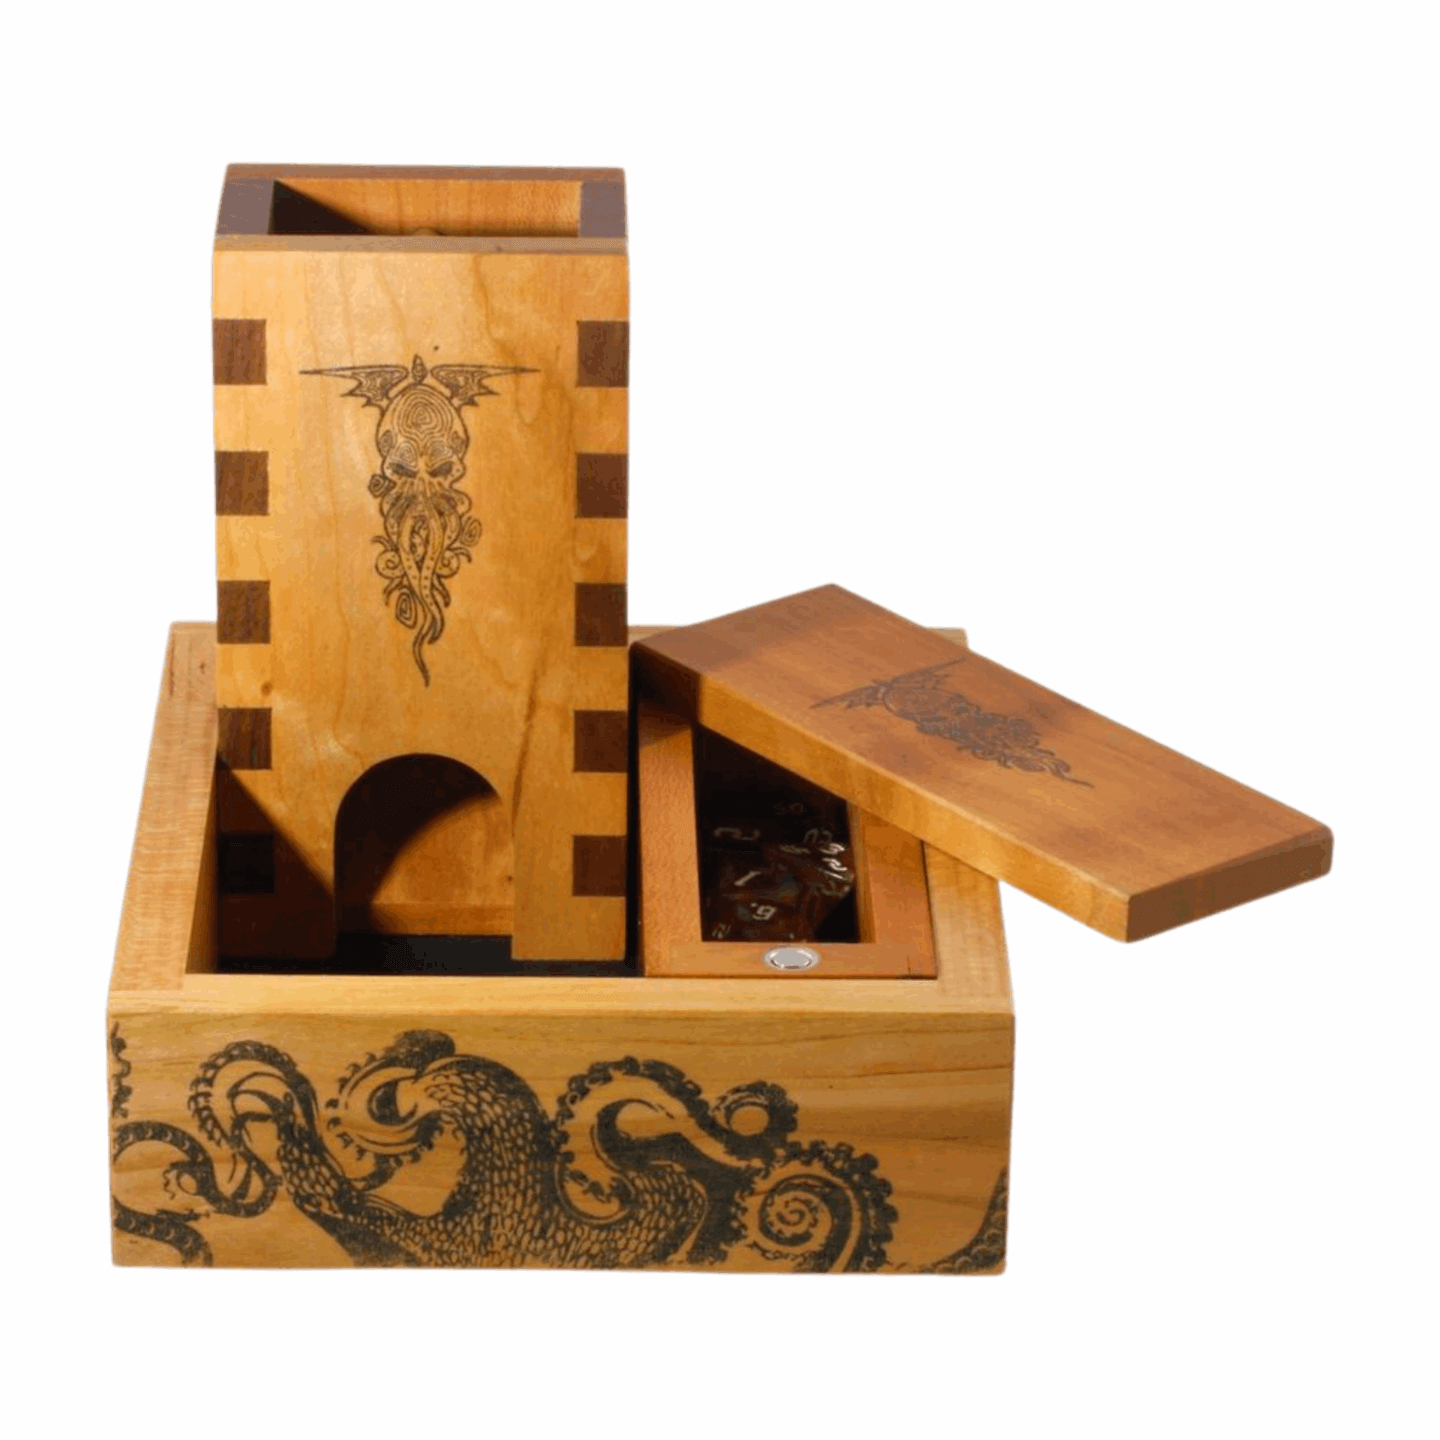 Cthulhu Dice Roller with Box Joints, Dice Vault, Tentacle Dice Tray for DnD